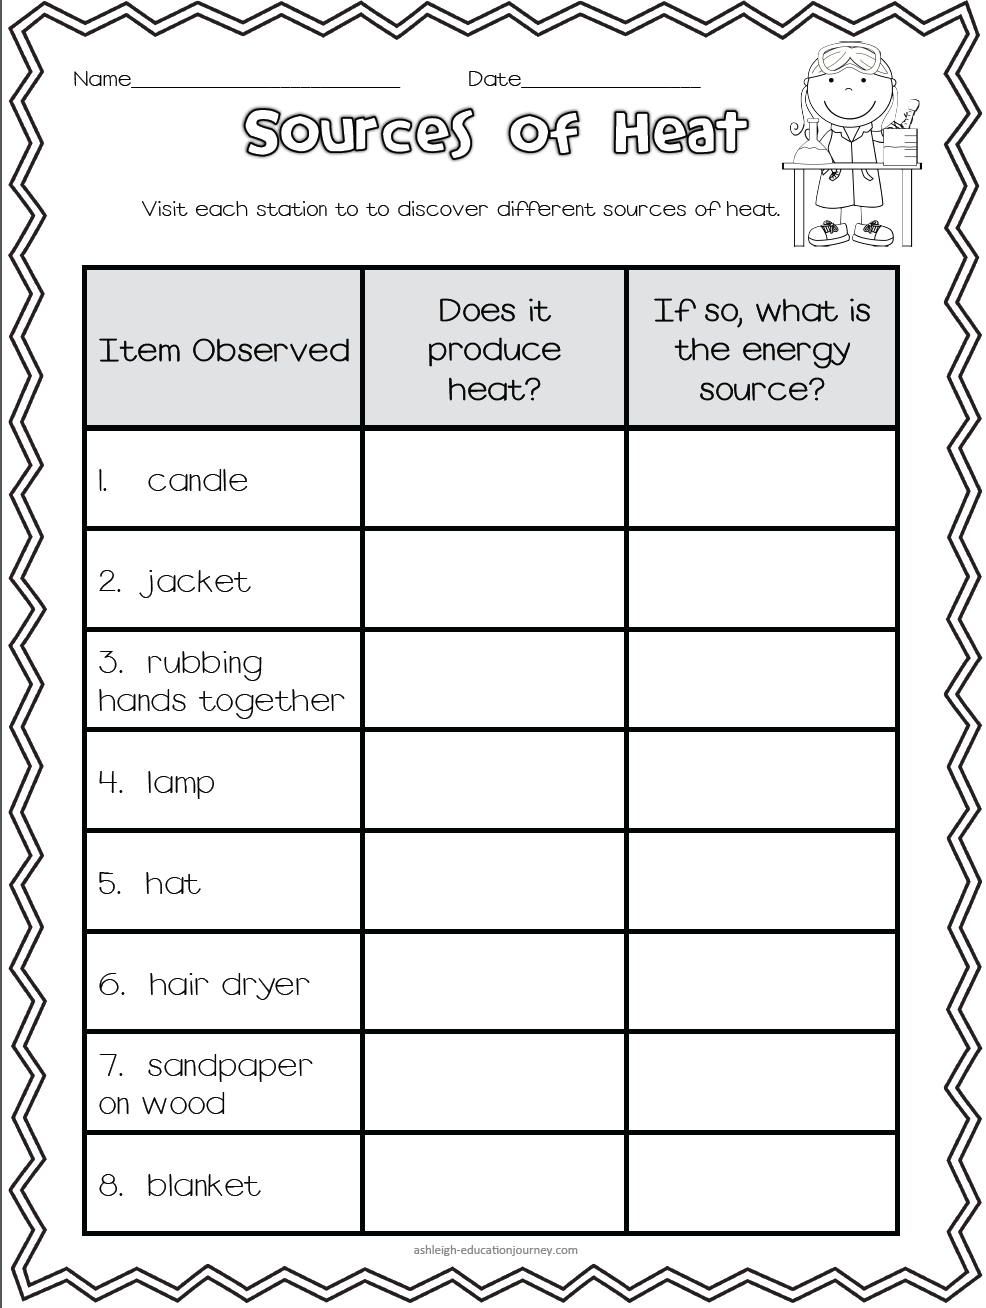 Second Grade Science Third Grade Science Energy Worksheets